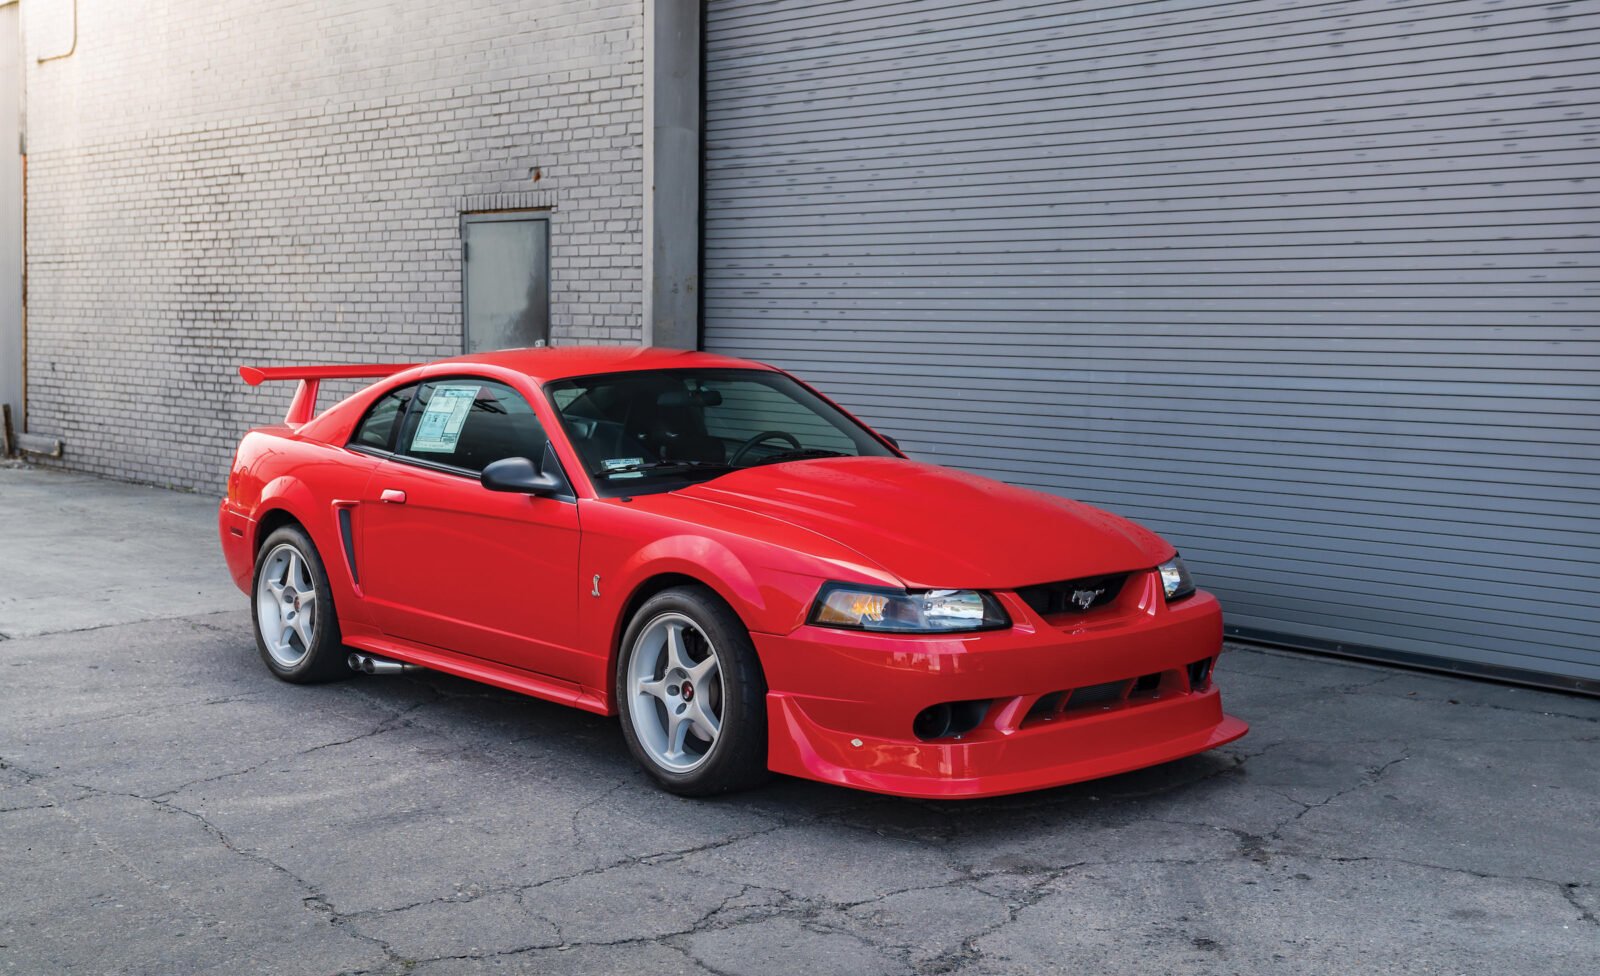 2000 Ford Svt Mustang Cobra R 385 Bhp 0 60 Mph In 4 4